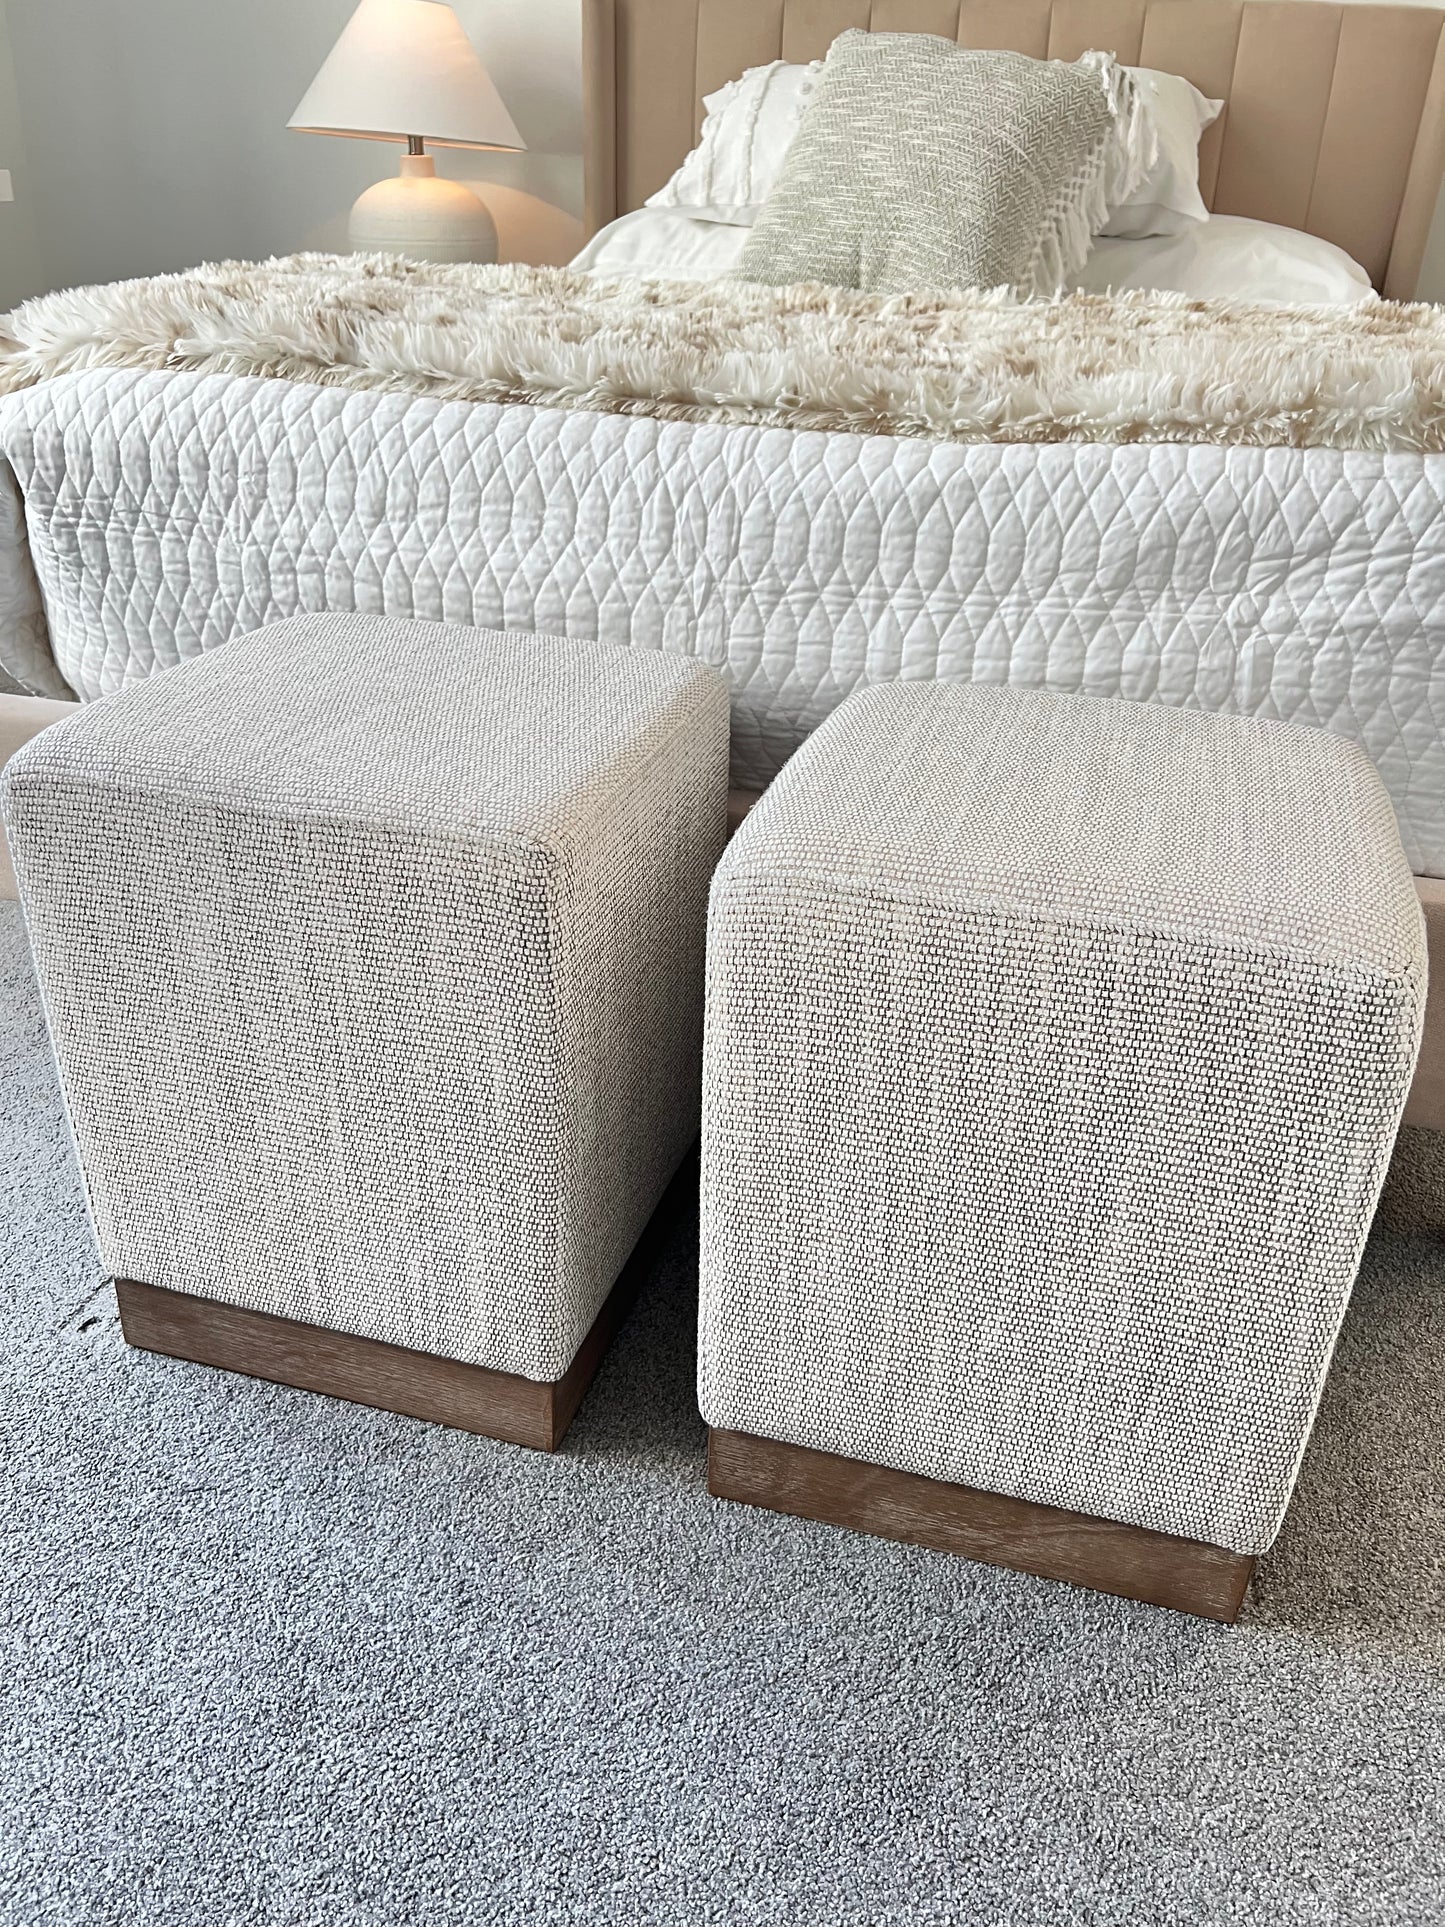 Upholstered cube ottoman